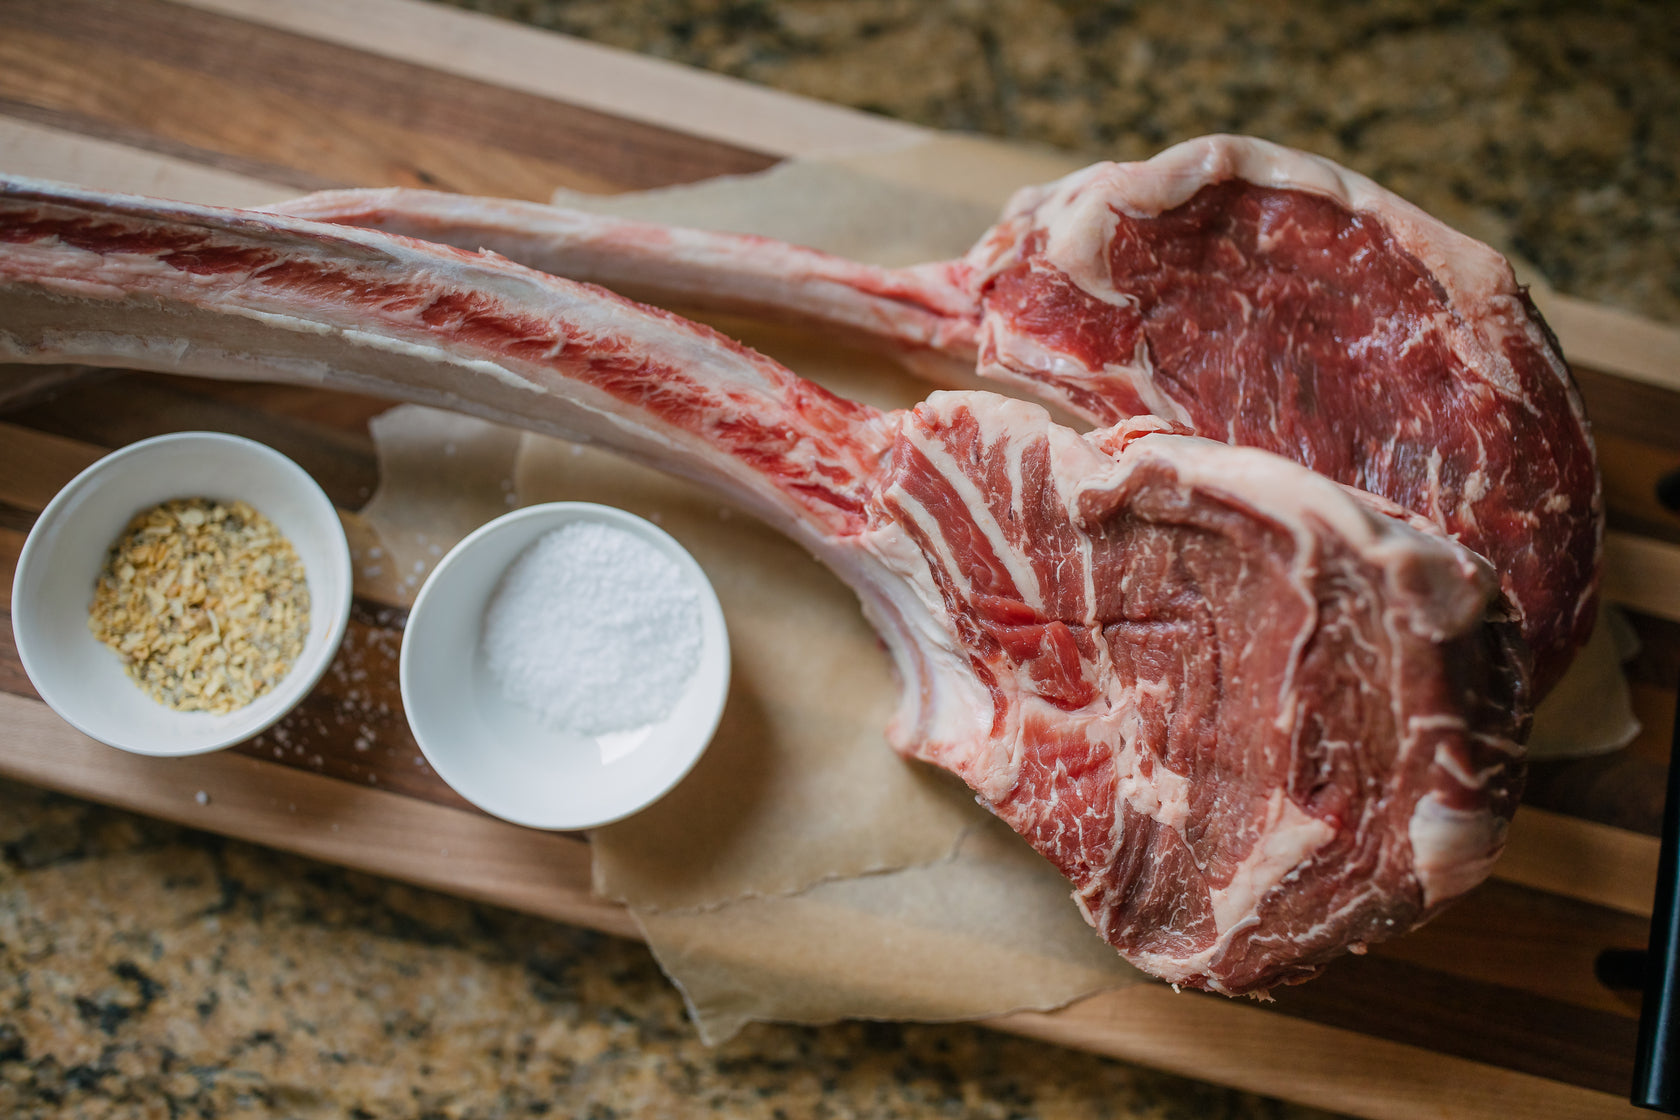 tomahawk steak with seasoning in dishes